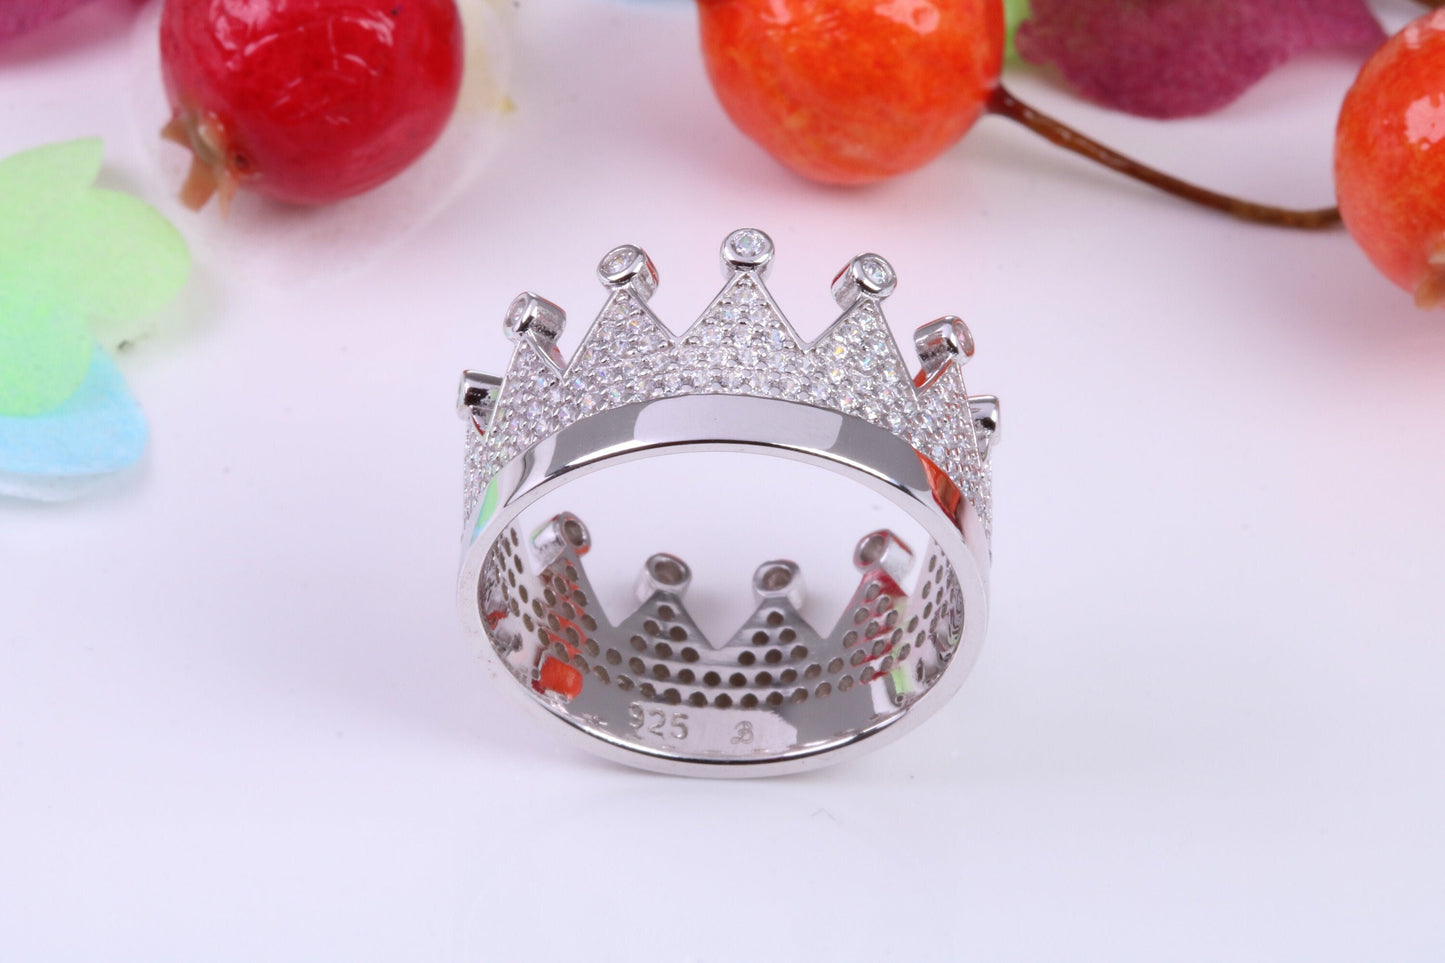 Crown Ring, Very Dressy 11 mm wide Cubic Zirconia set Ring, Made from solid Silver